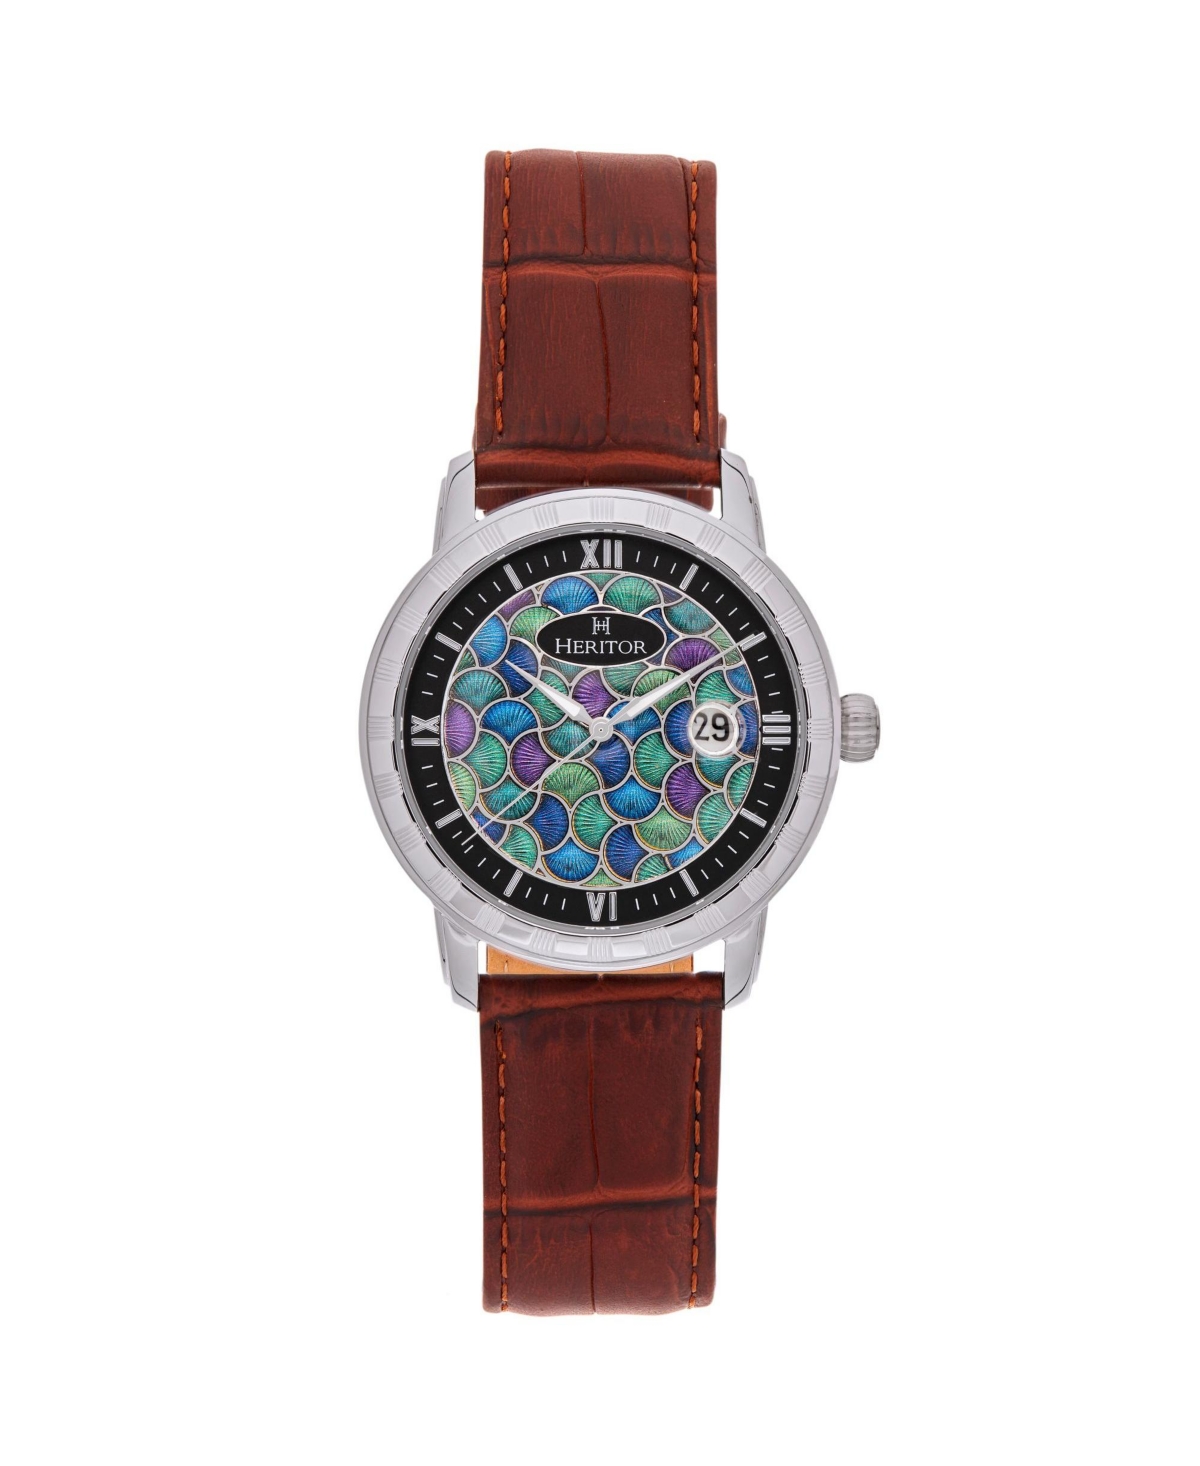 Men Protege Leather Strap Watch w/Date - Silver/Brown - Silver/brown